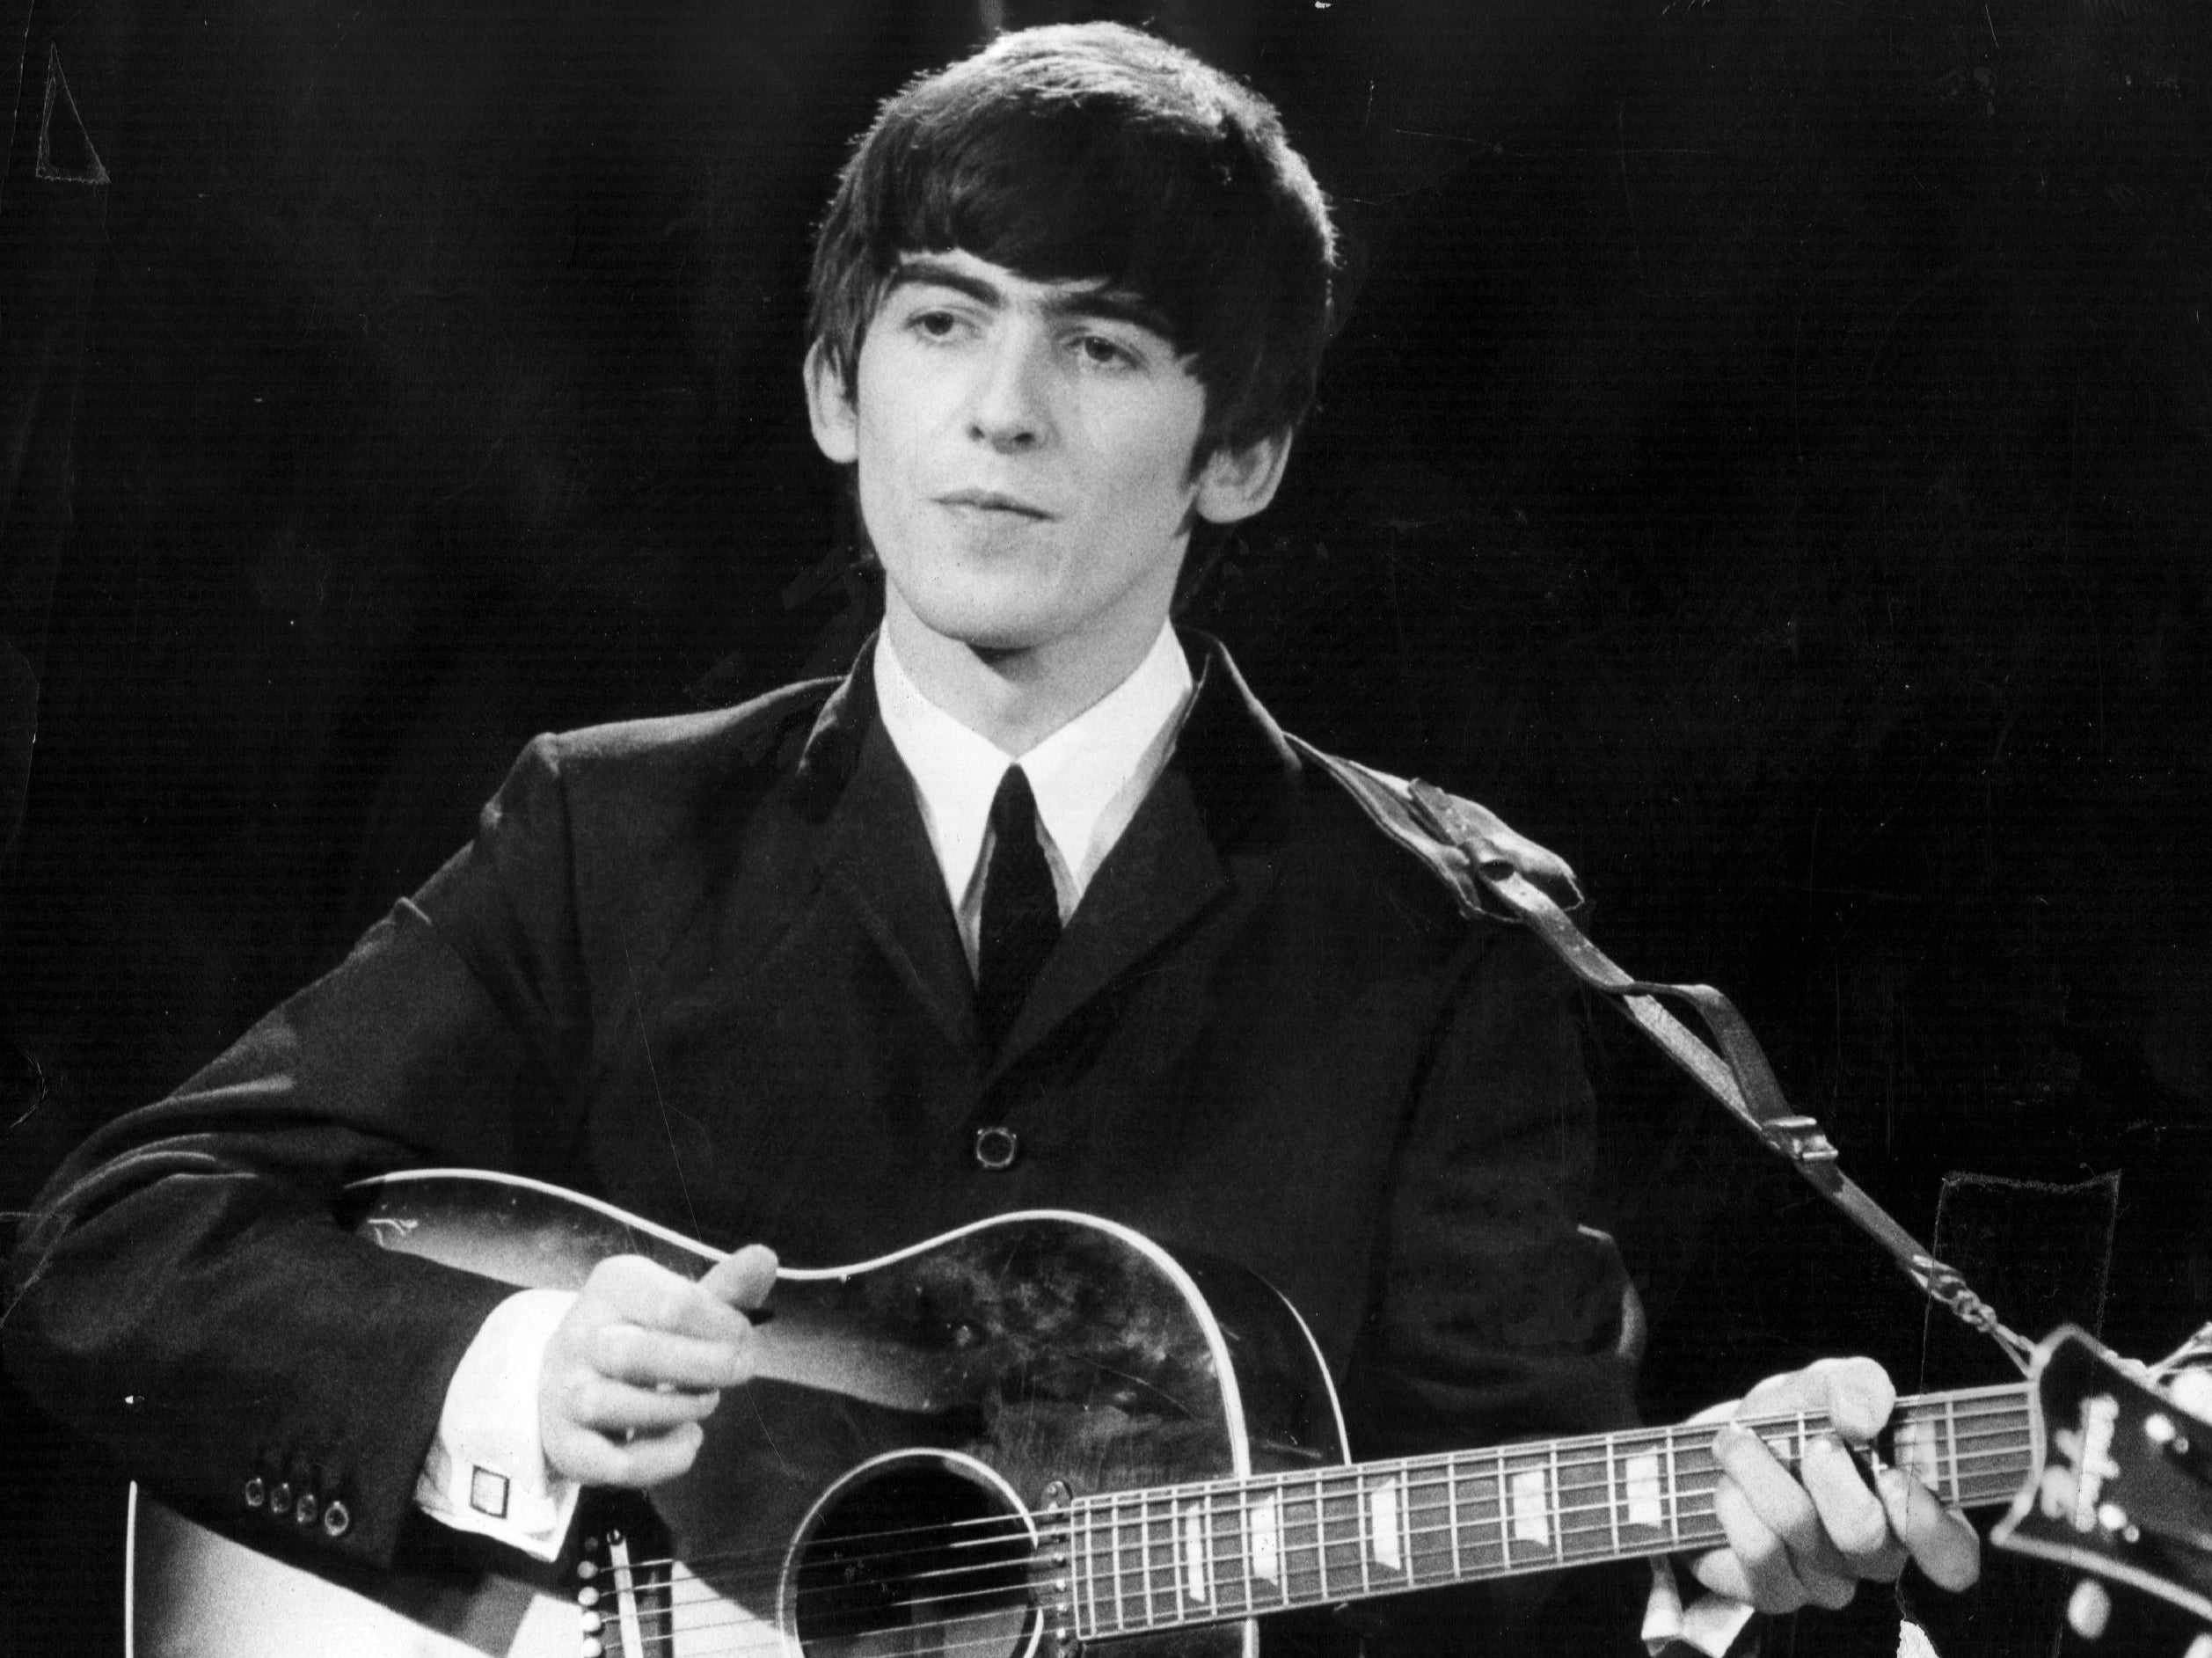 George Harrison was one of the great cultural pioneers of modern